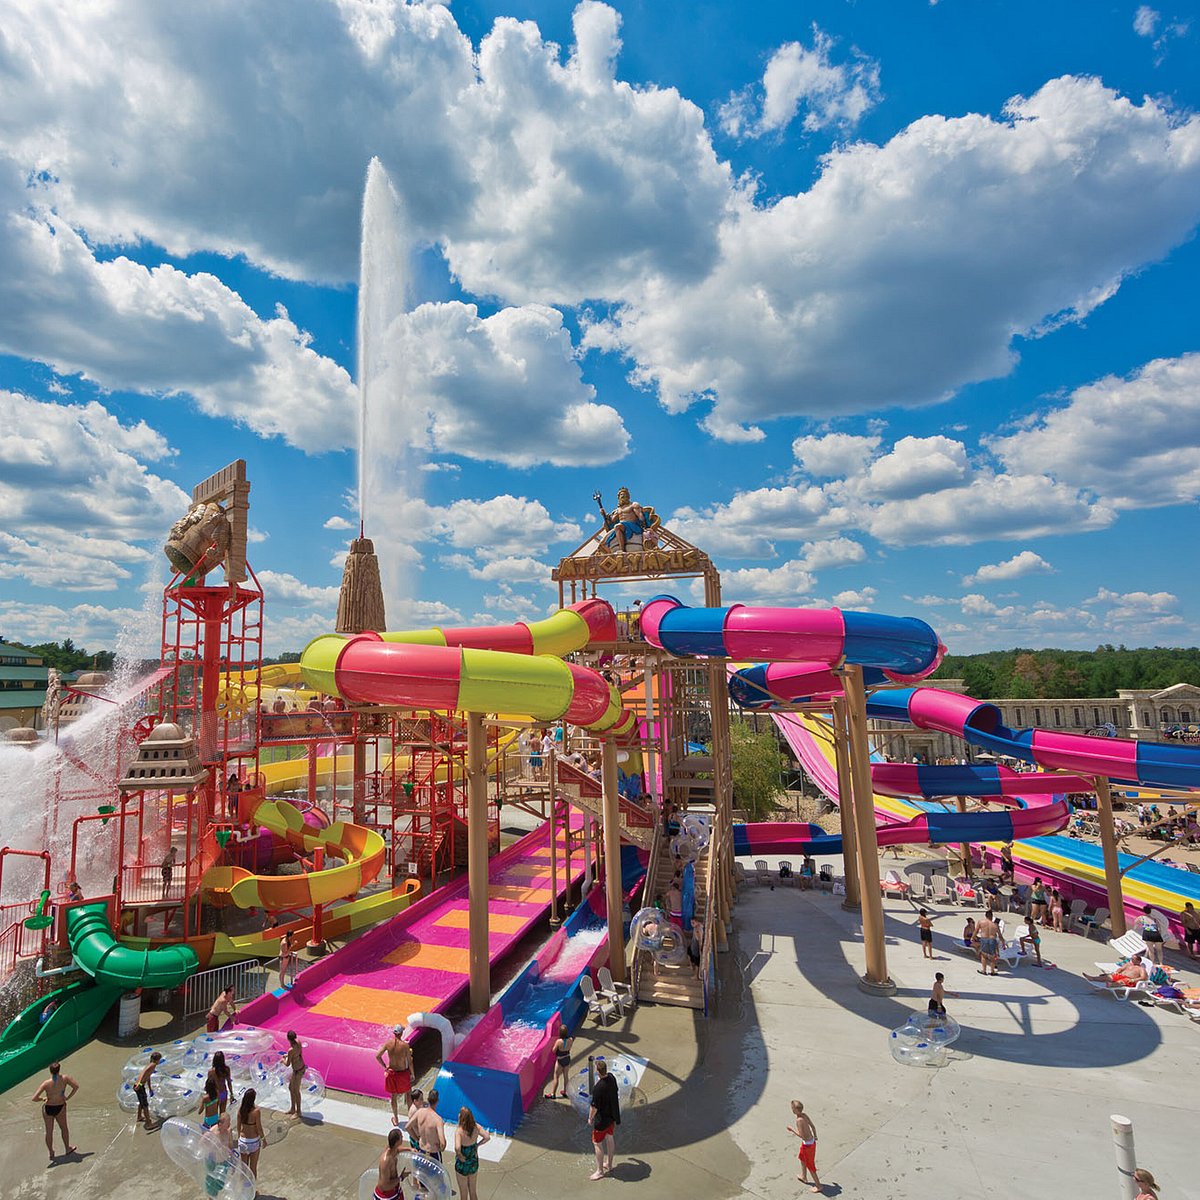 America's tallest waterslide is coming to Mt. Olympus in the